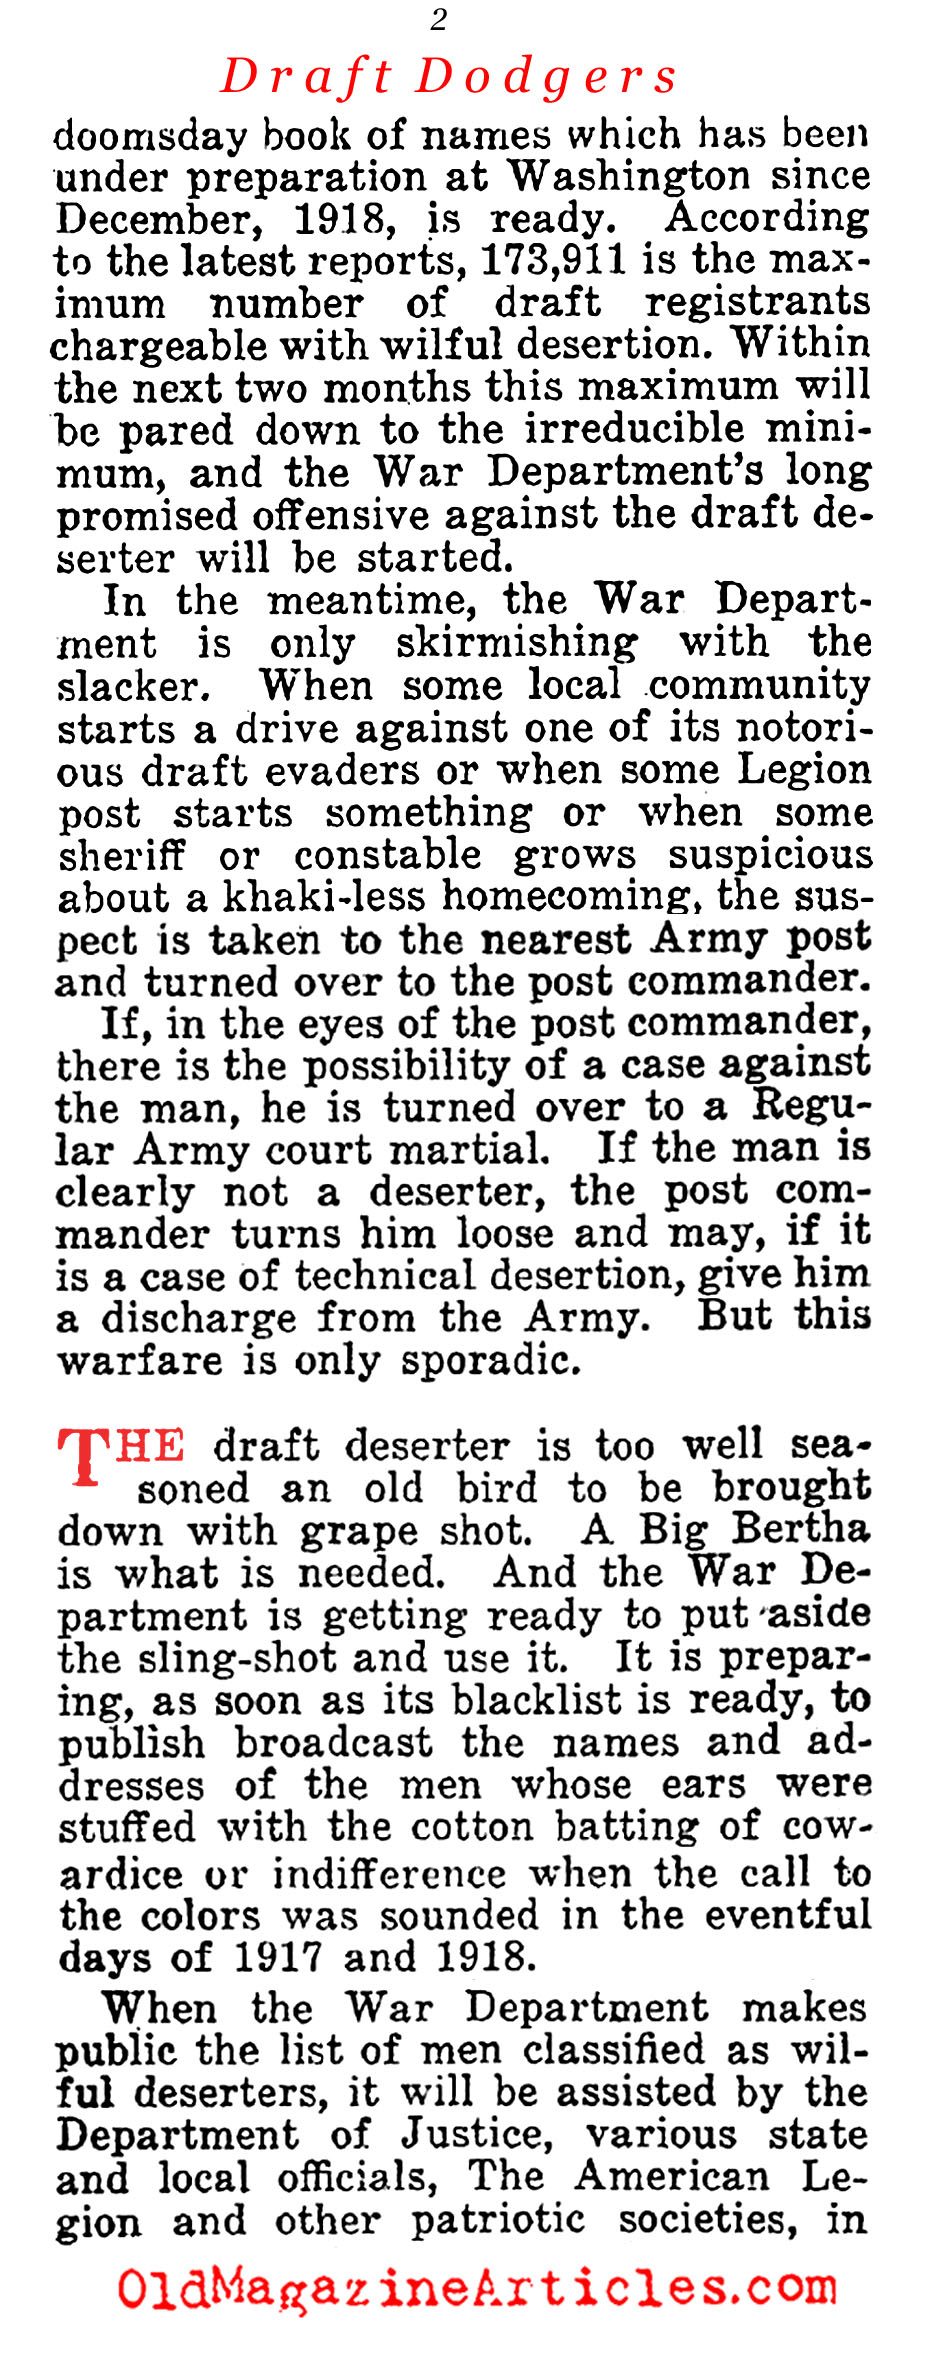 Crack of Doom for the Draft Dodgers (American Legion Weekly, 1920)